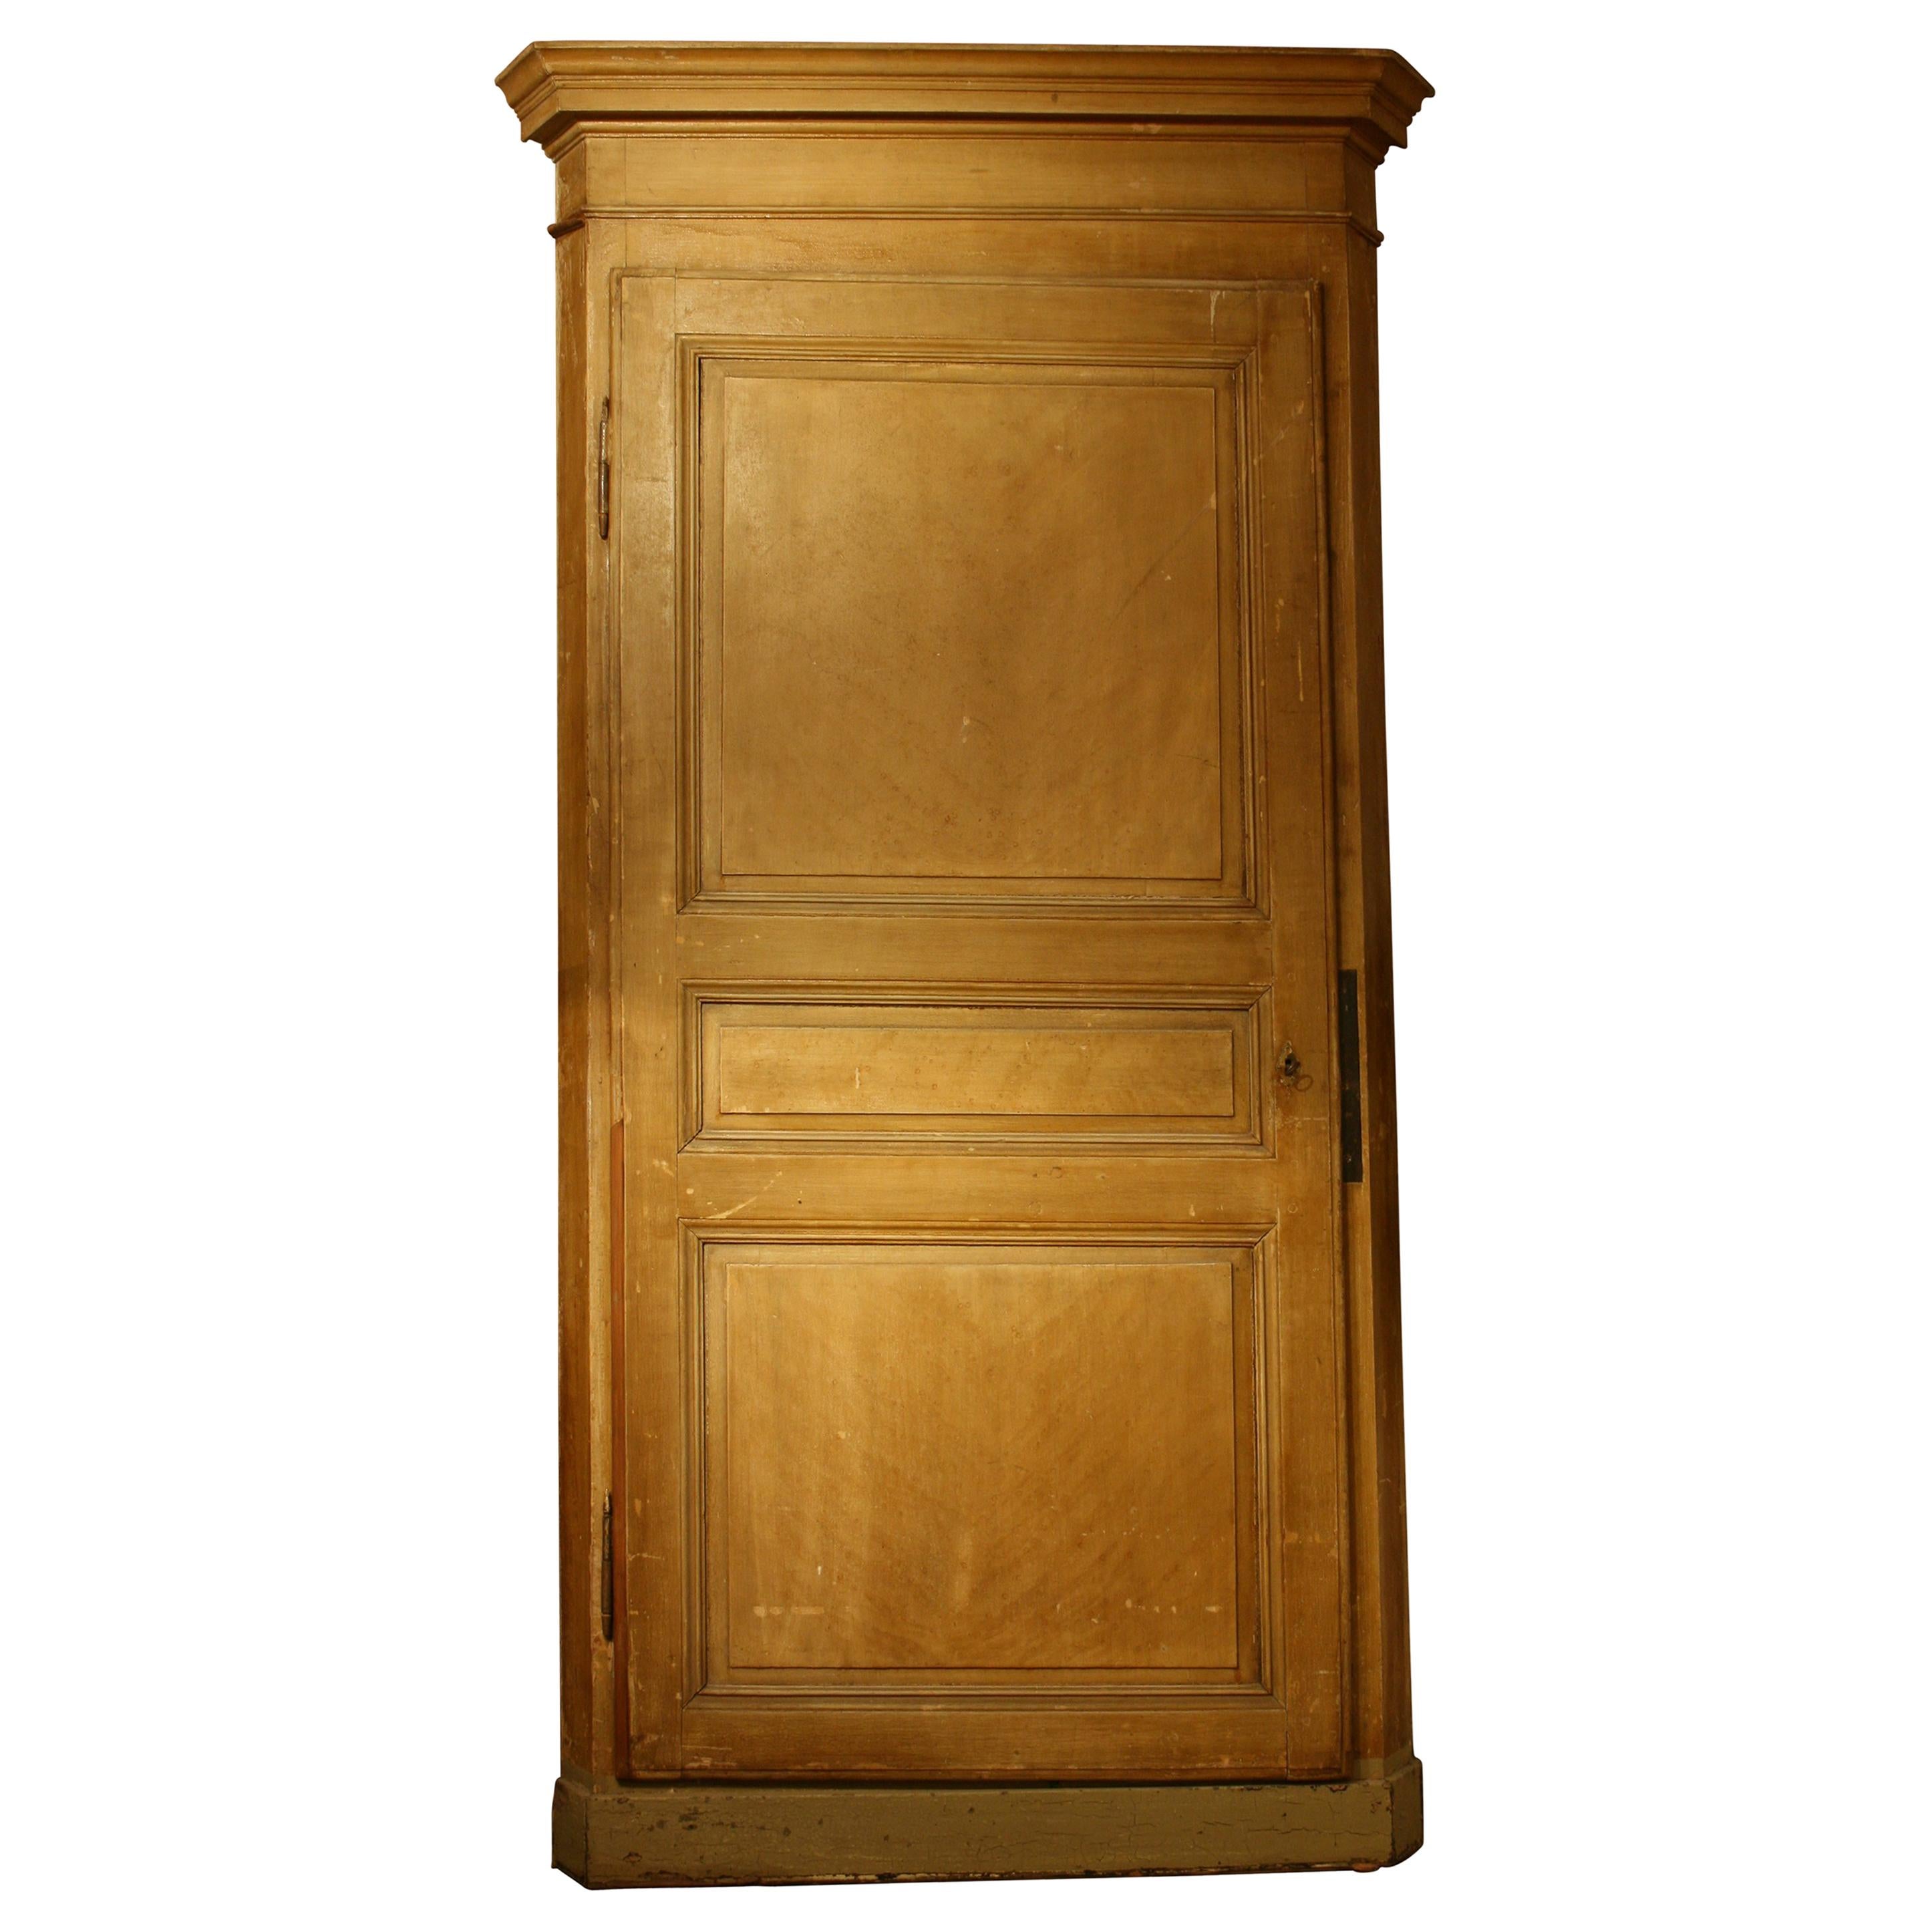 Large 19th Century French Corner Cupboard in Original Paint